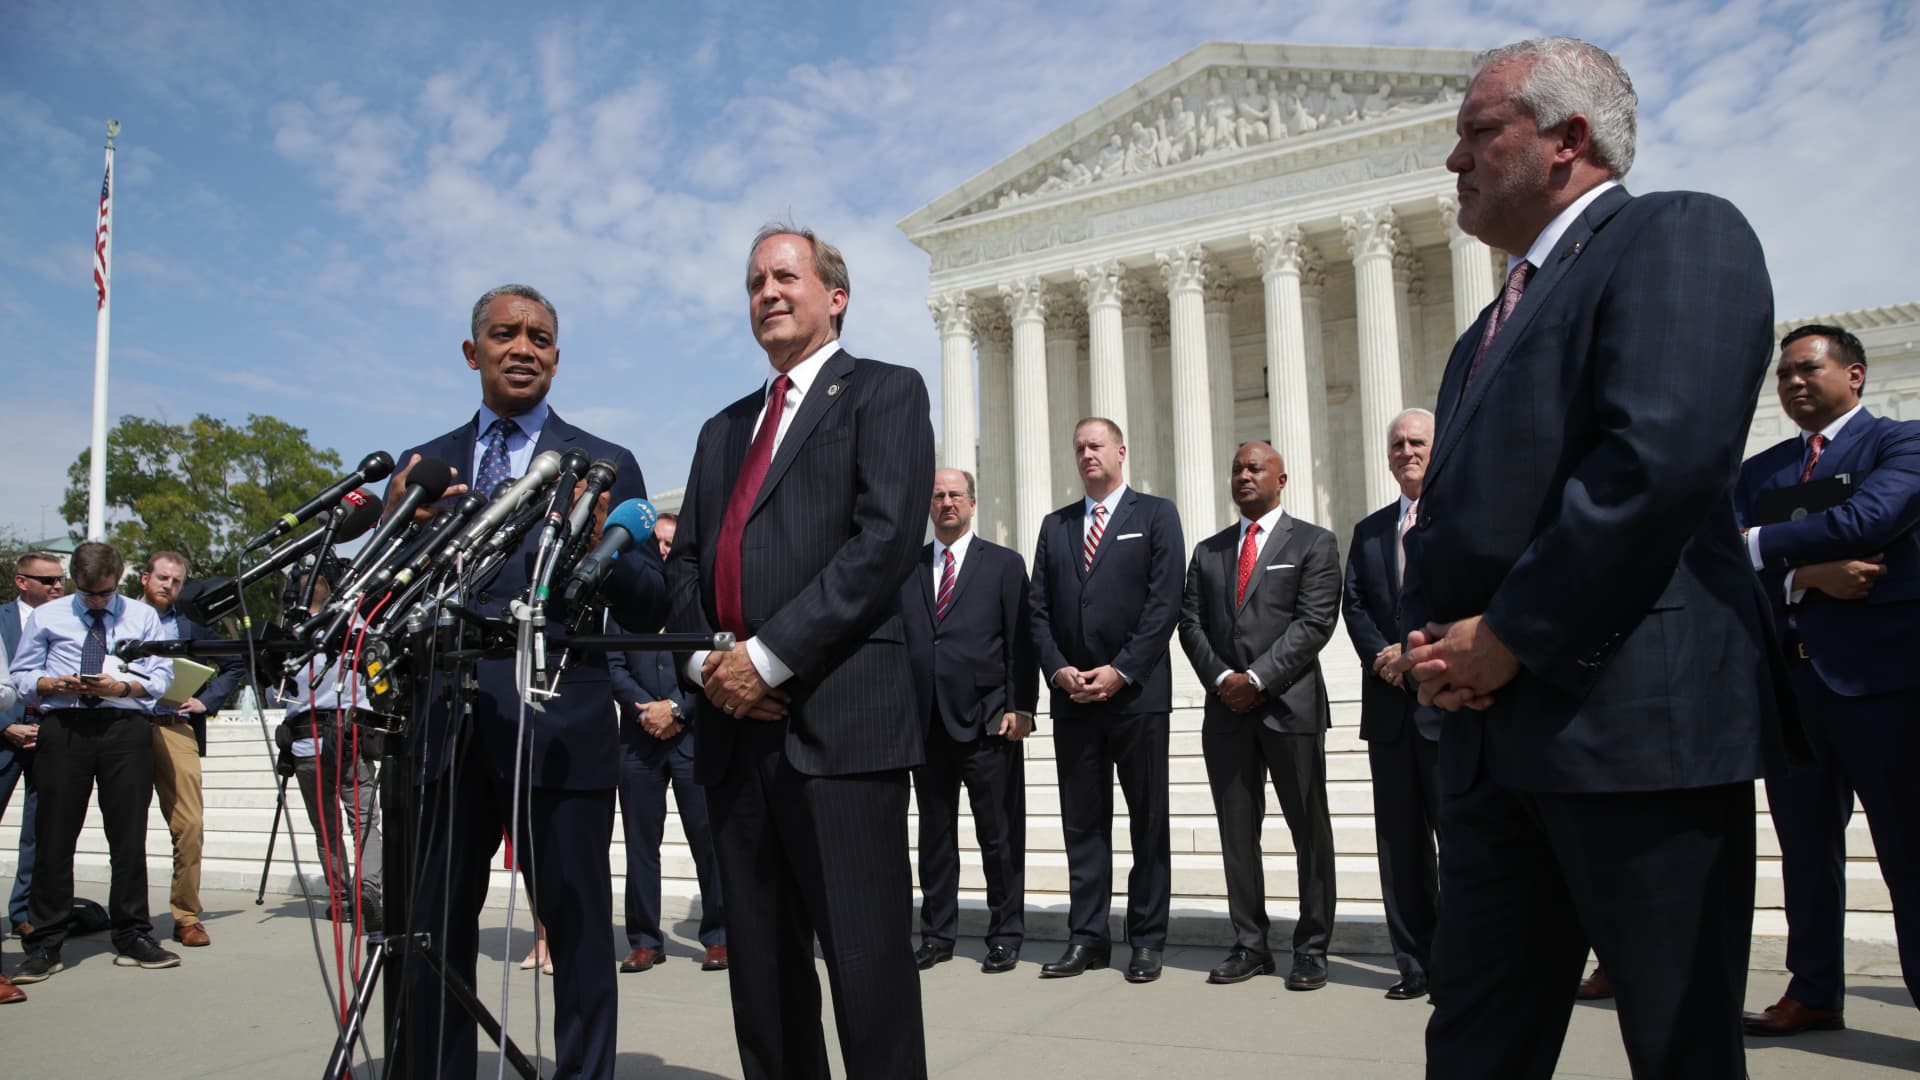 (L-R) Washington, DC Attorney General Karl Racine (L) speaks as Arkansas Attorney General Leslie Rutledge and Texas Attorney General Ken Paxton listens during a news conference in front of the U.S. Supreme Court September 9, 2019 in Washington, DC.